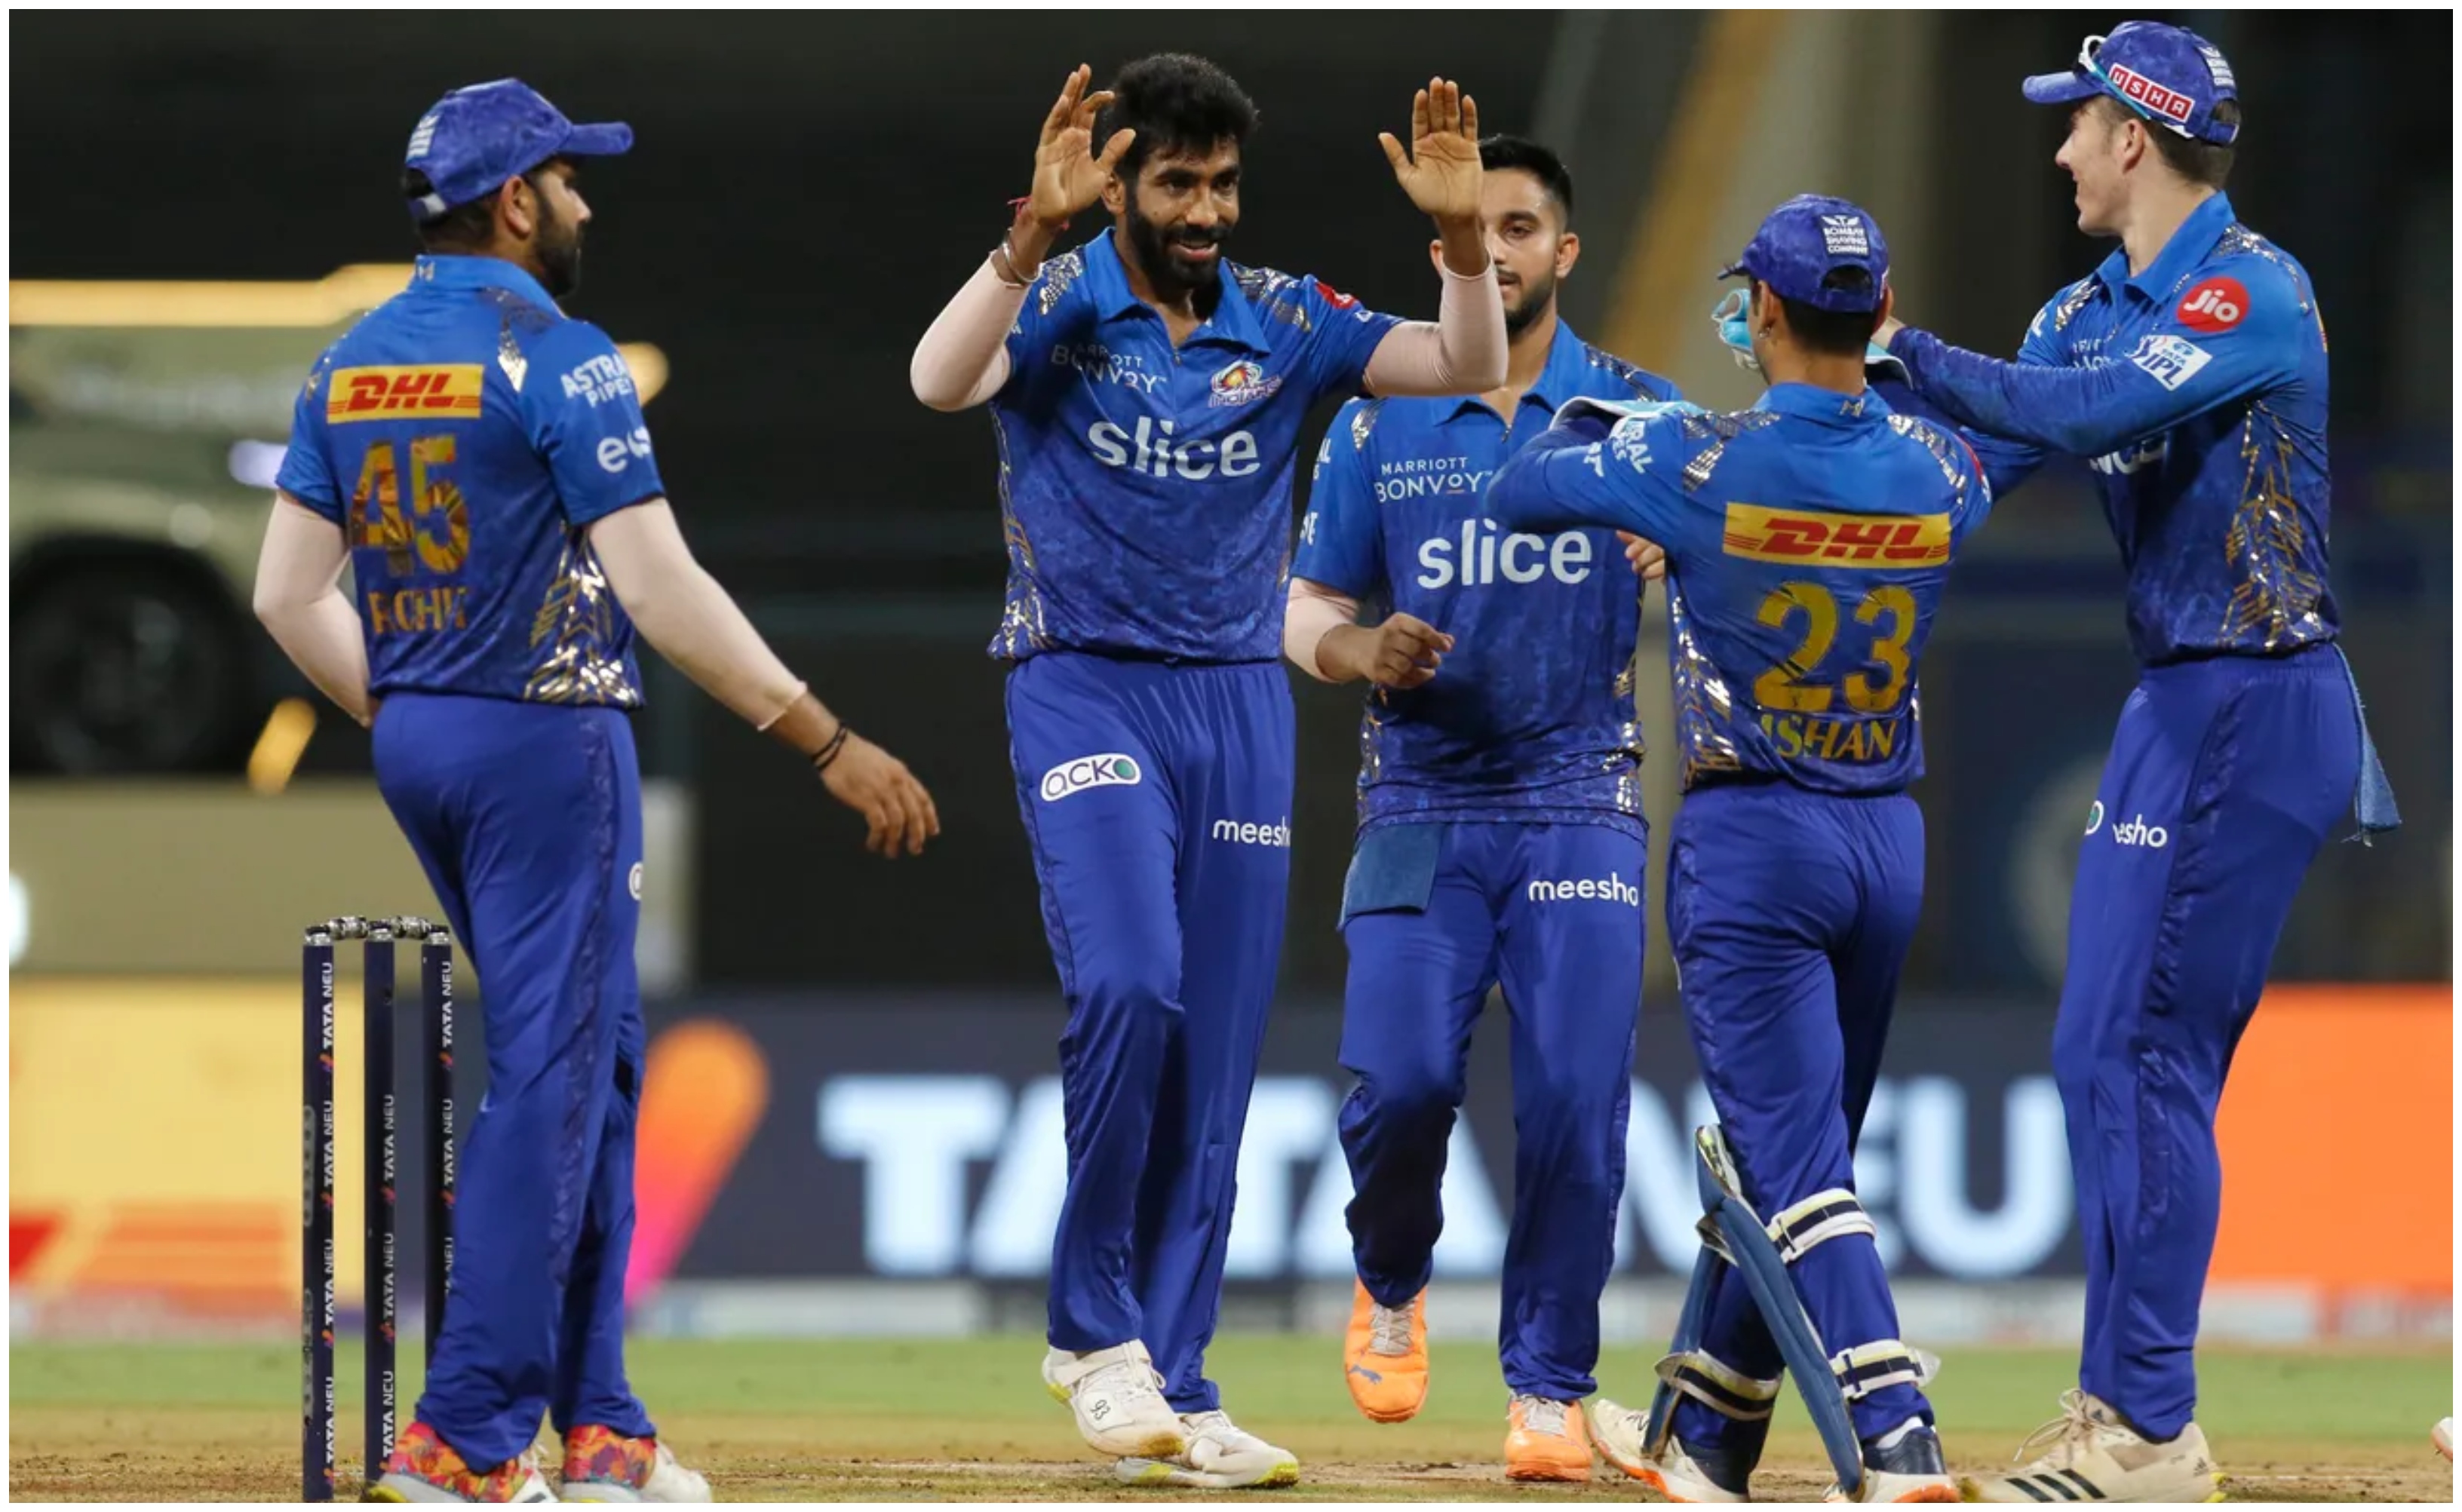 MI defeated DC by five wickets | BCCI/IPL